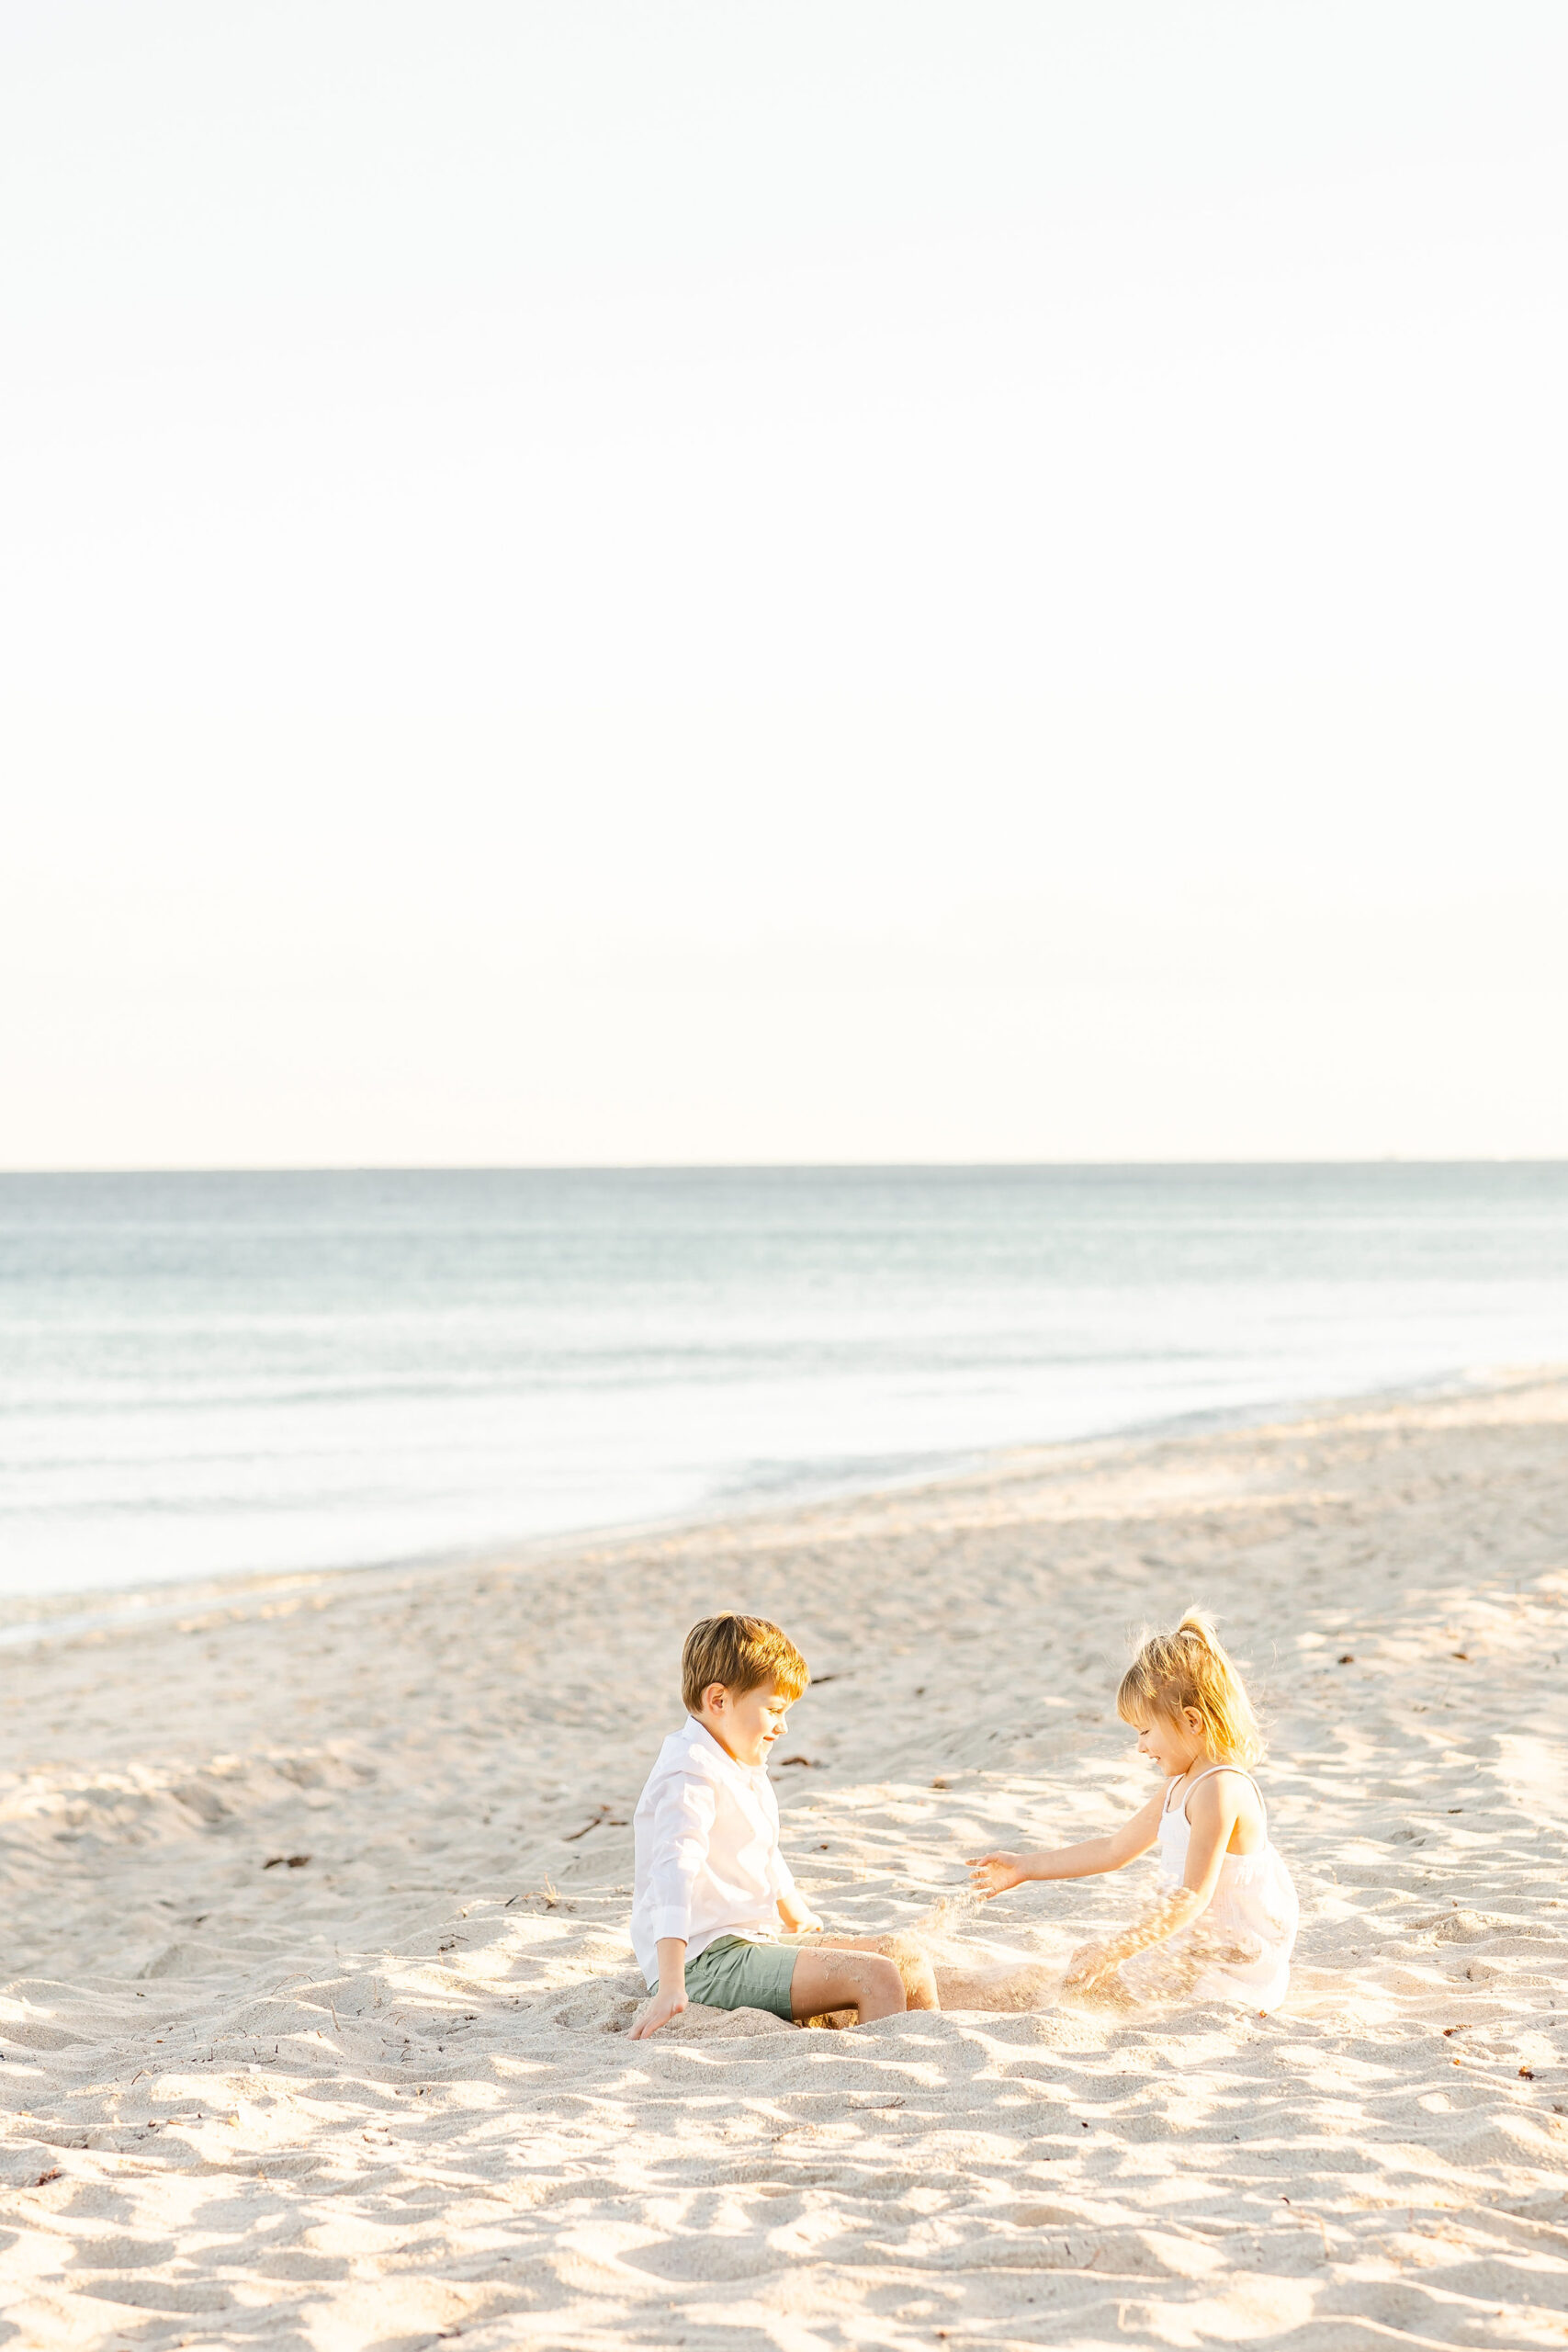 Boy and girl siblings play in the sand on a beach happy monkey shop